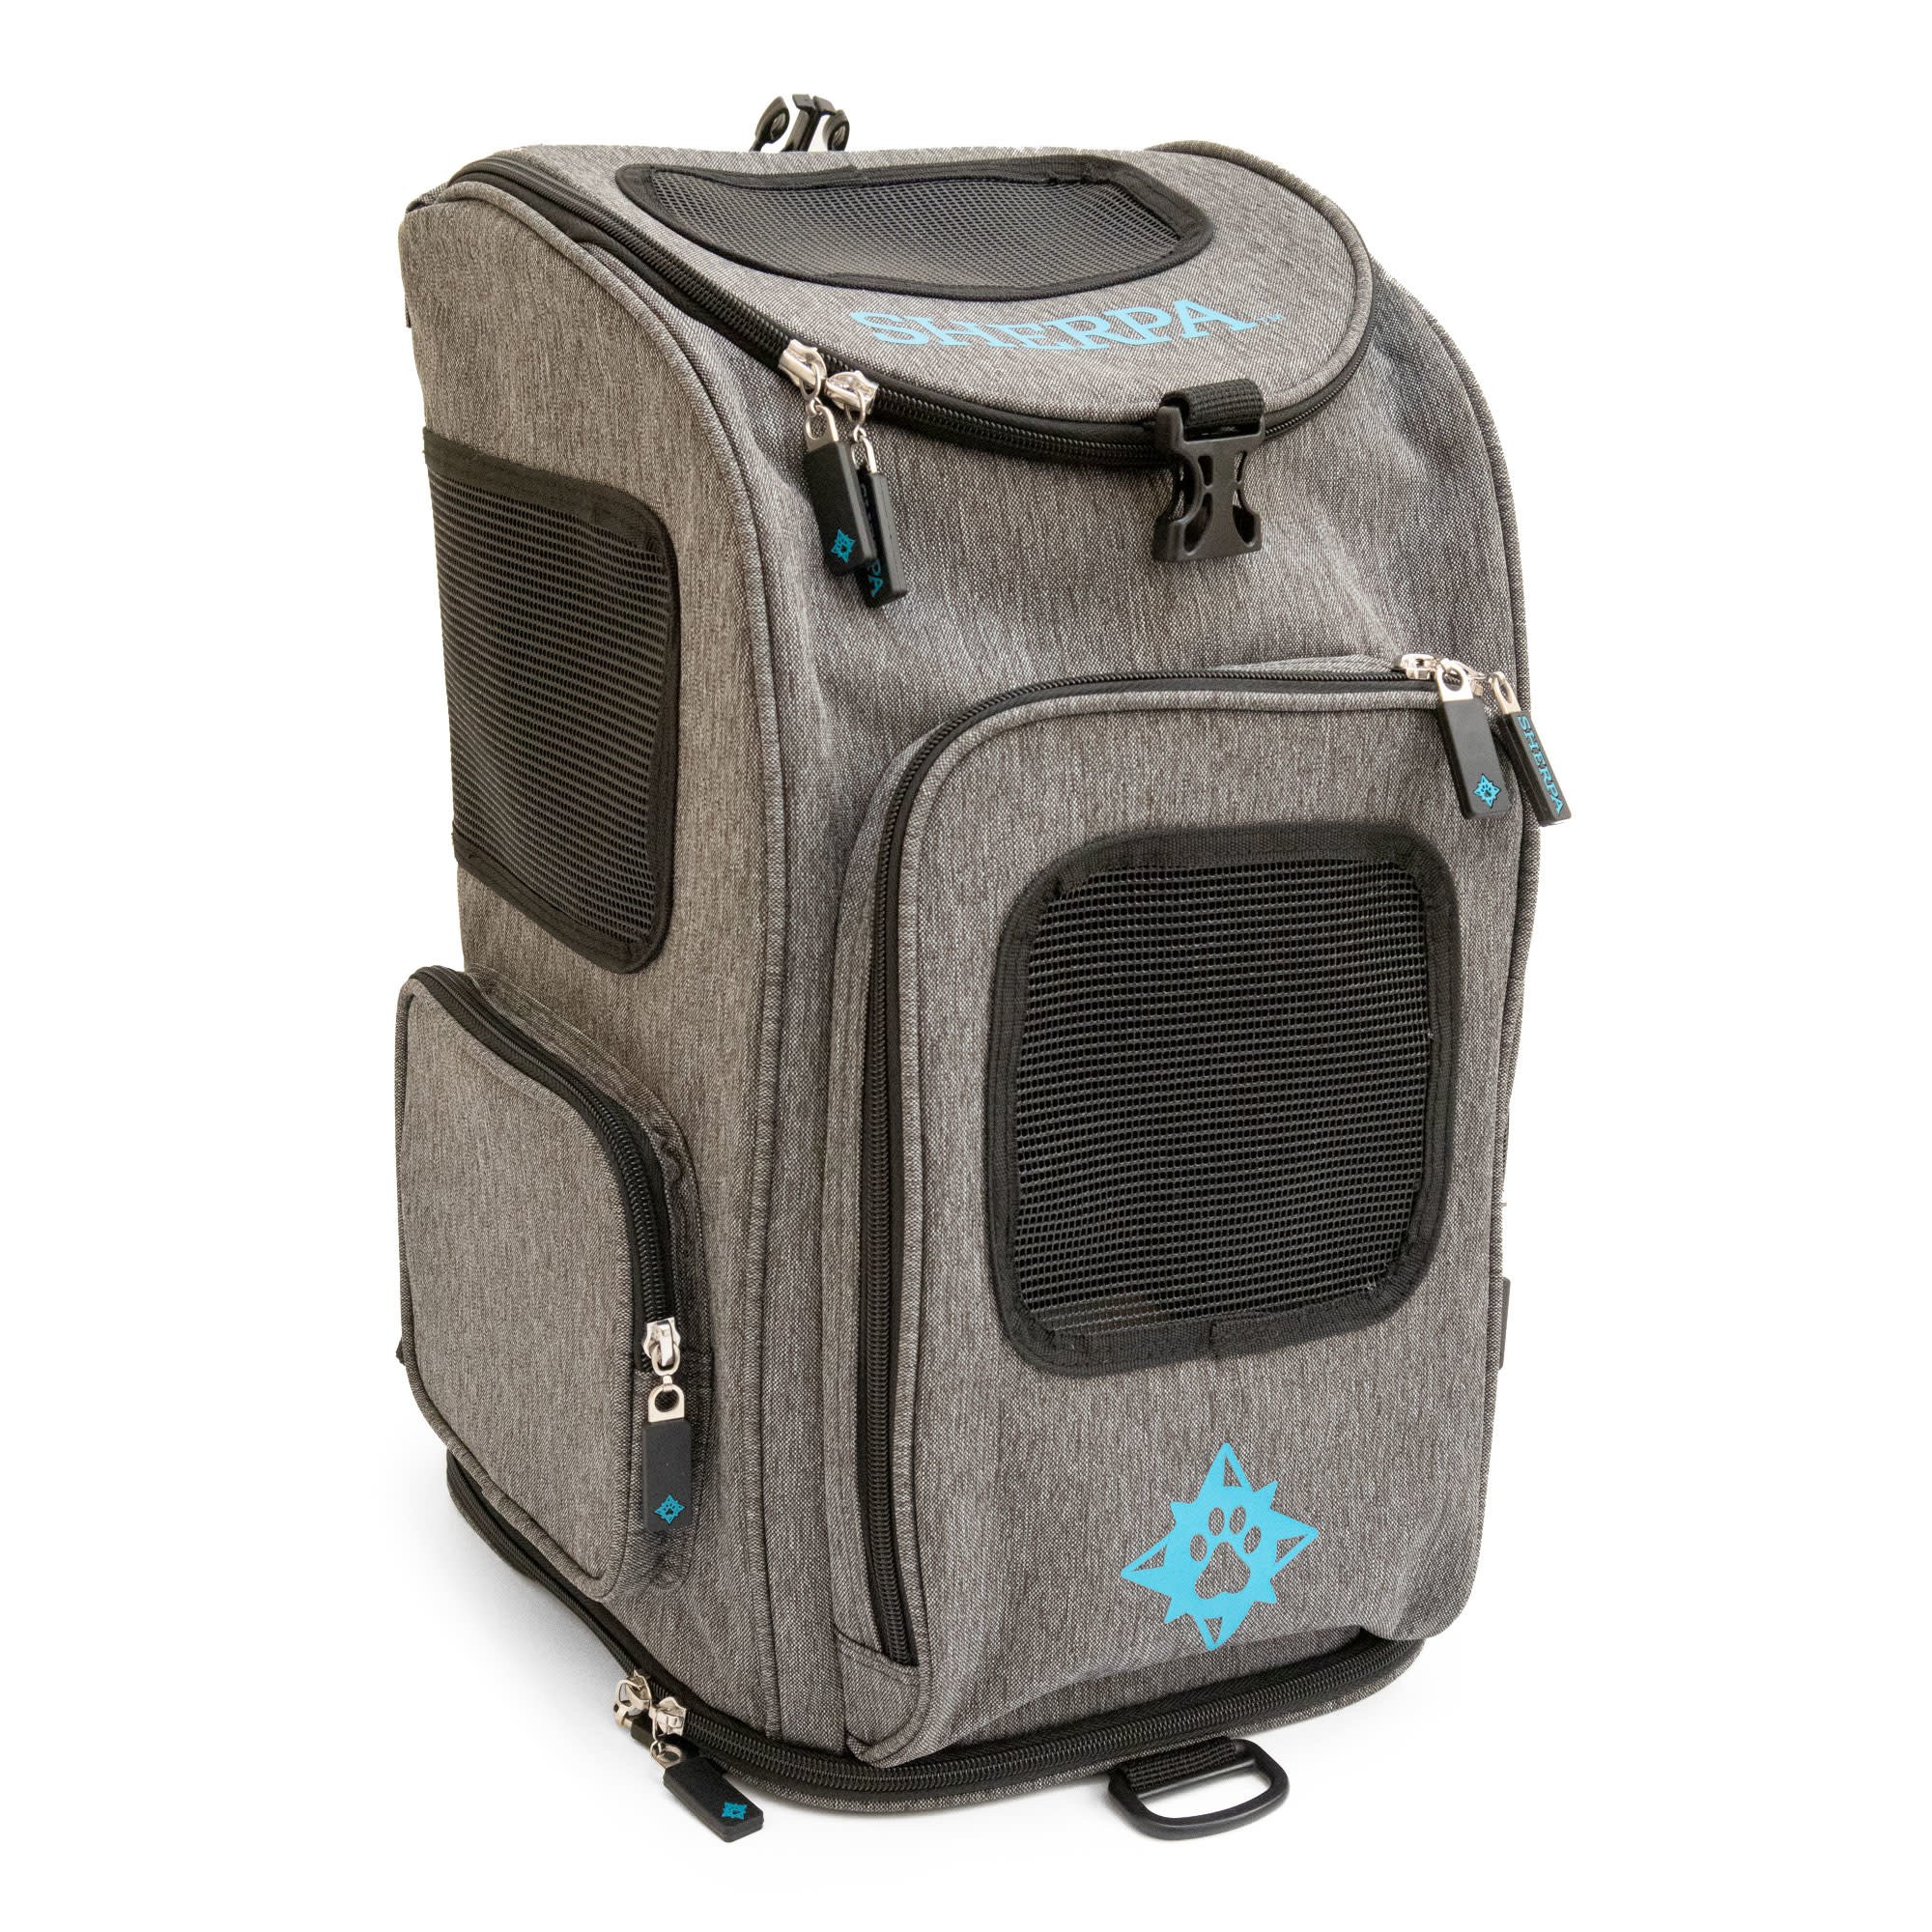 Sherpa Travel 2-in-1 Backpack Carrier